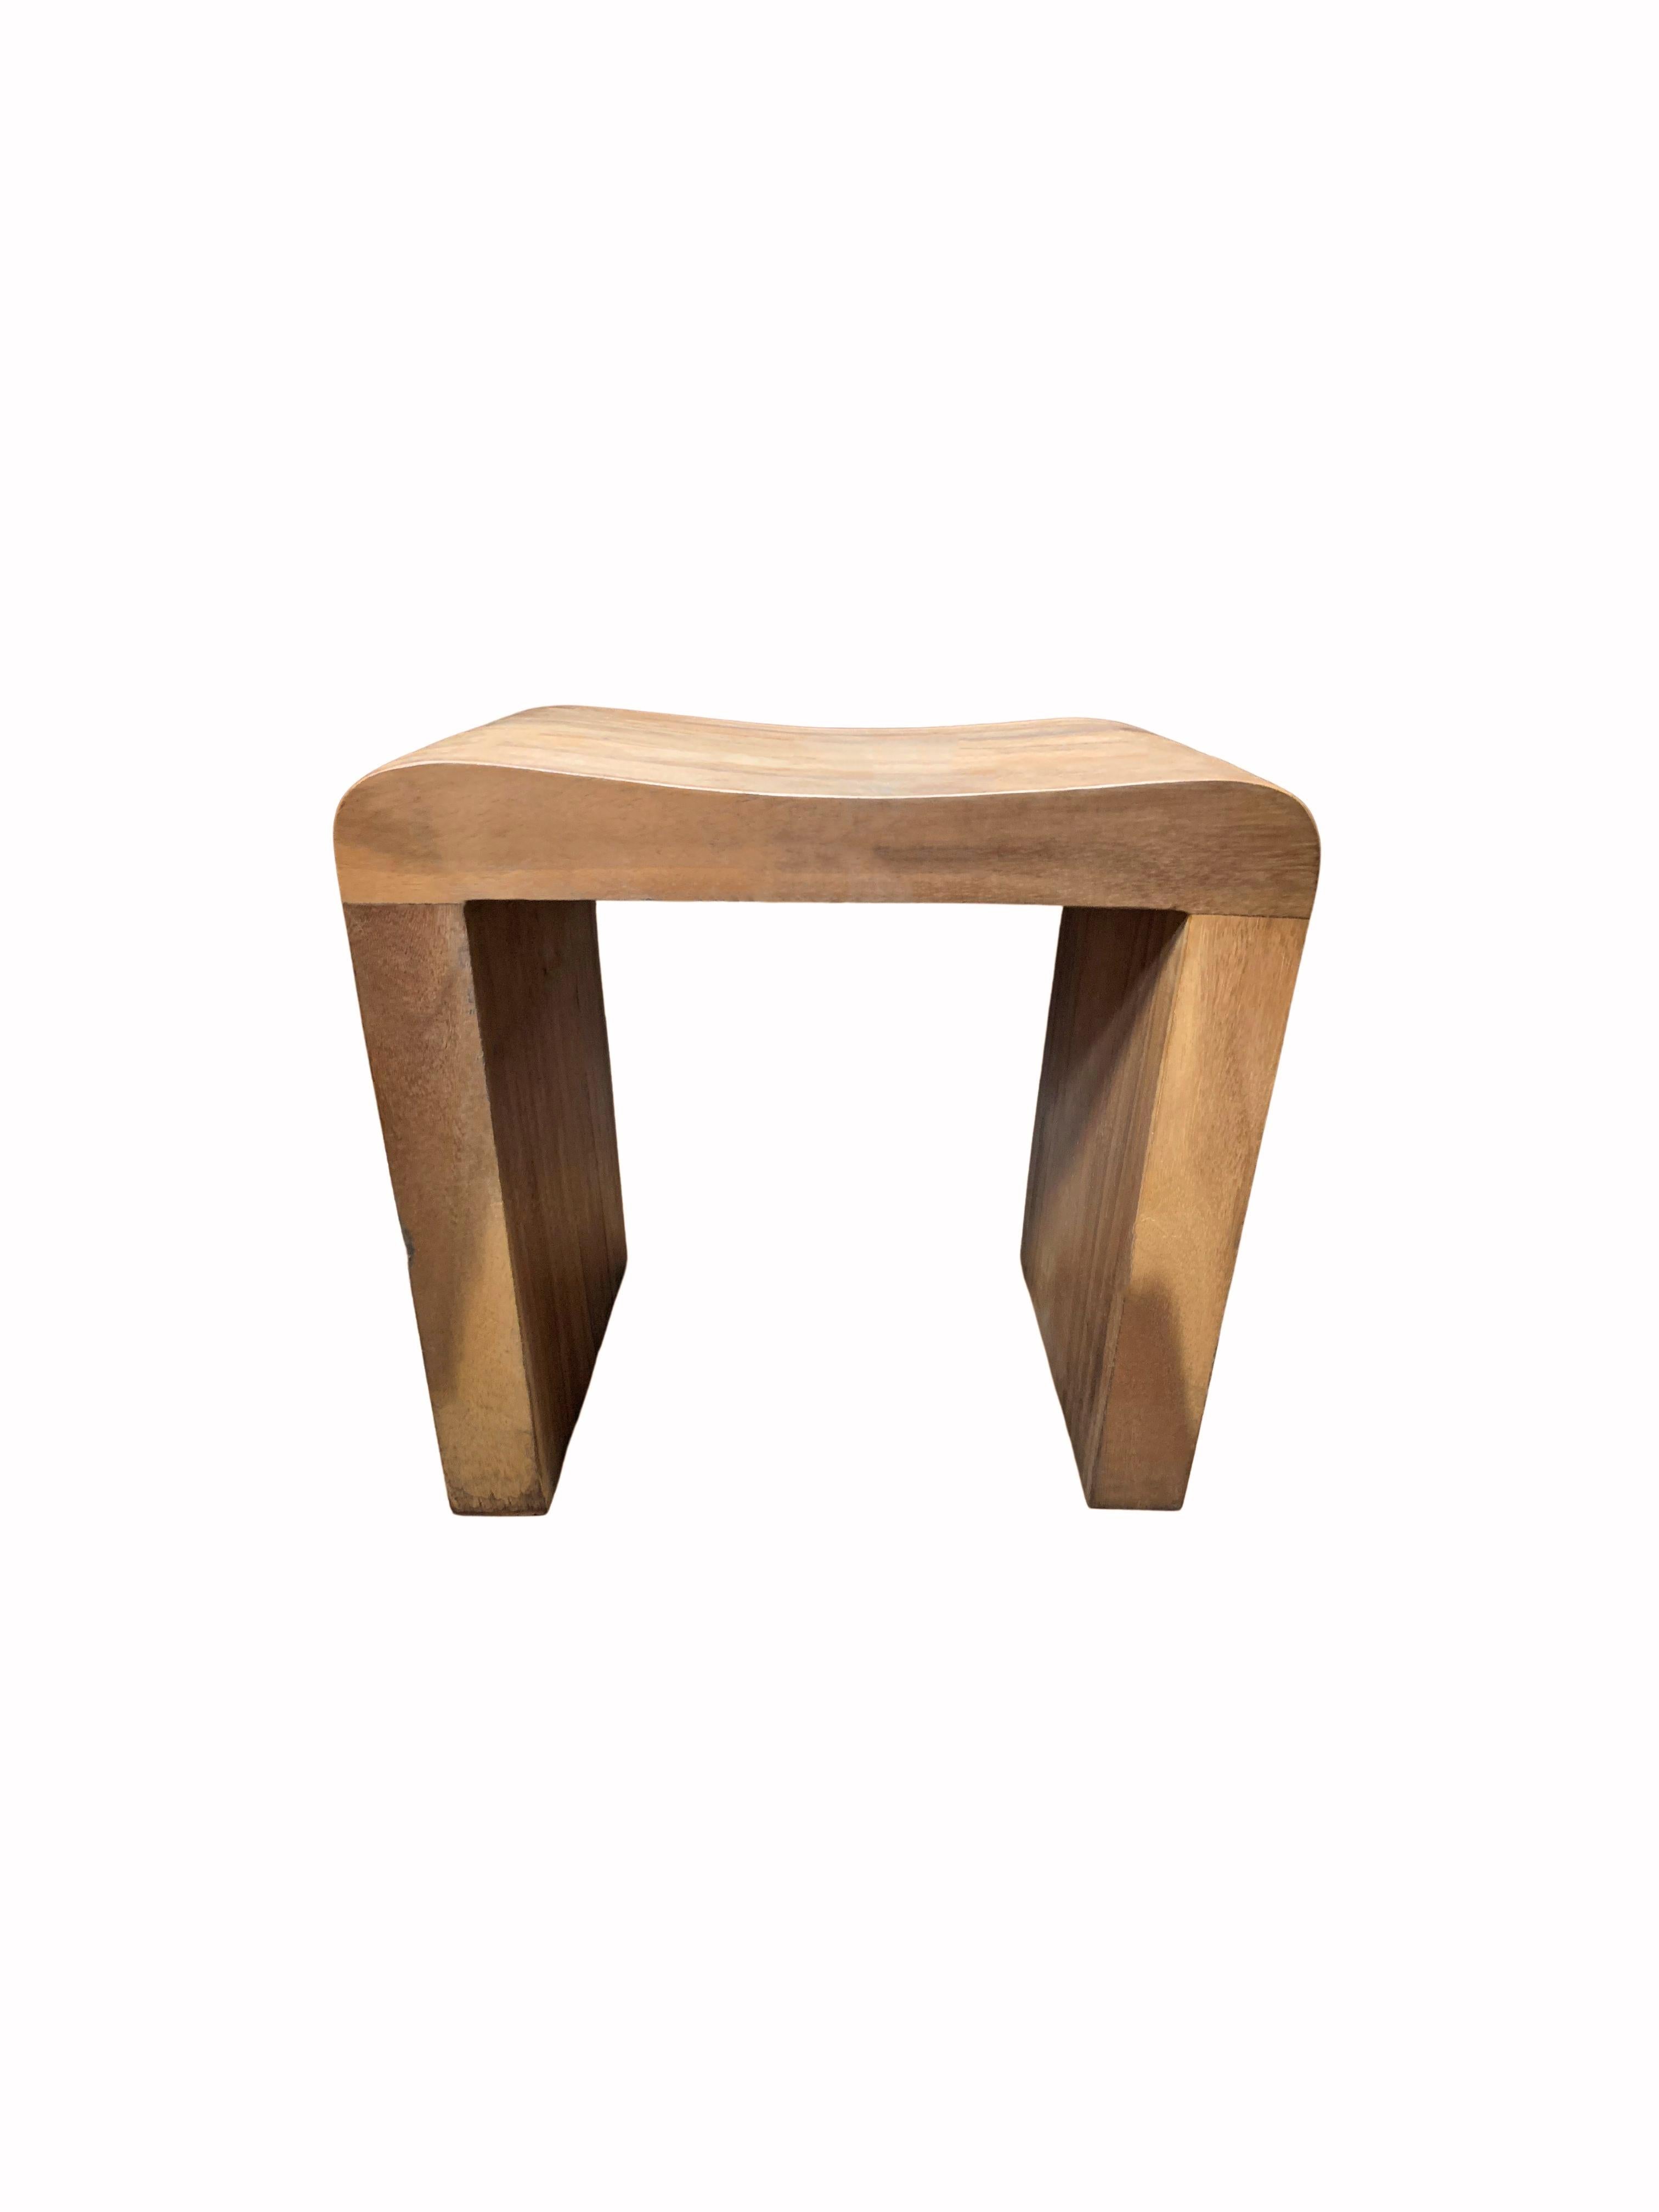 A wonderfully sculptural teak wood stool featuring a curved seat. The mix of wood textures and shades adds to its charm. Its neutral color and minimalist shape make it suitable for any space.